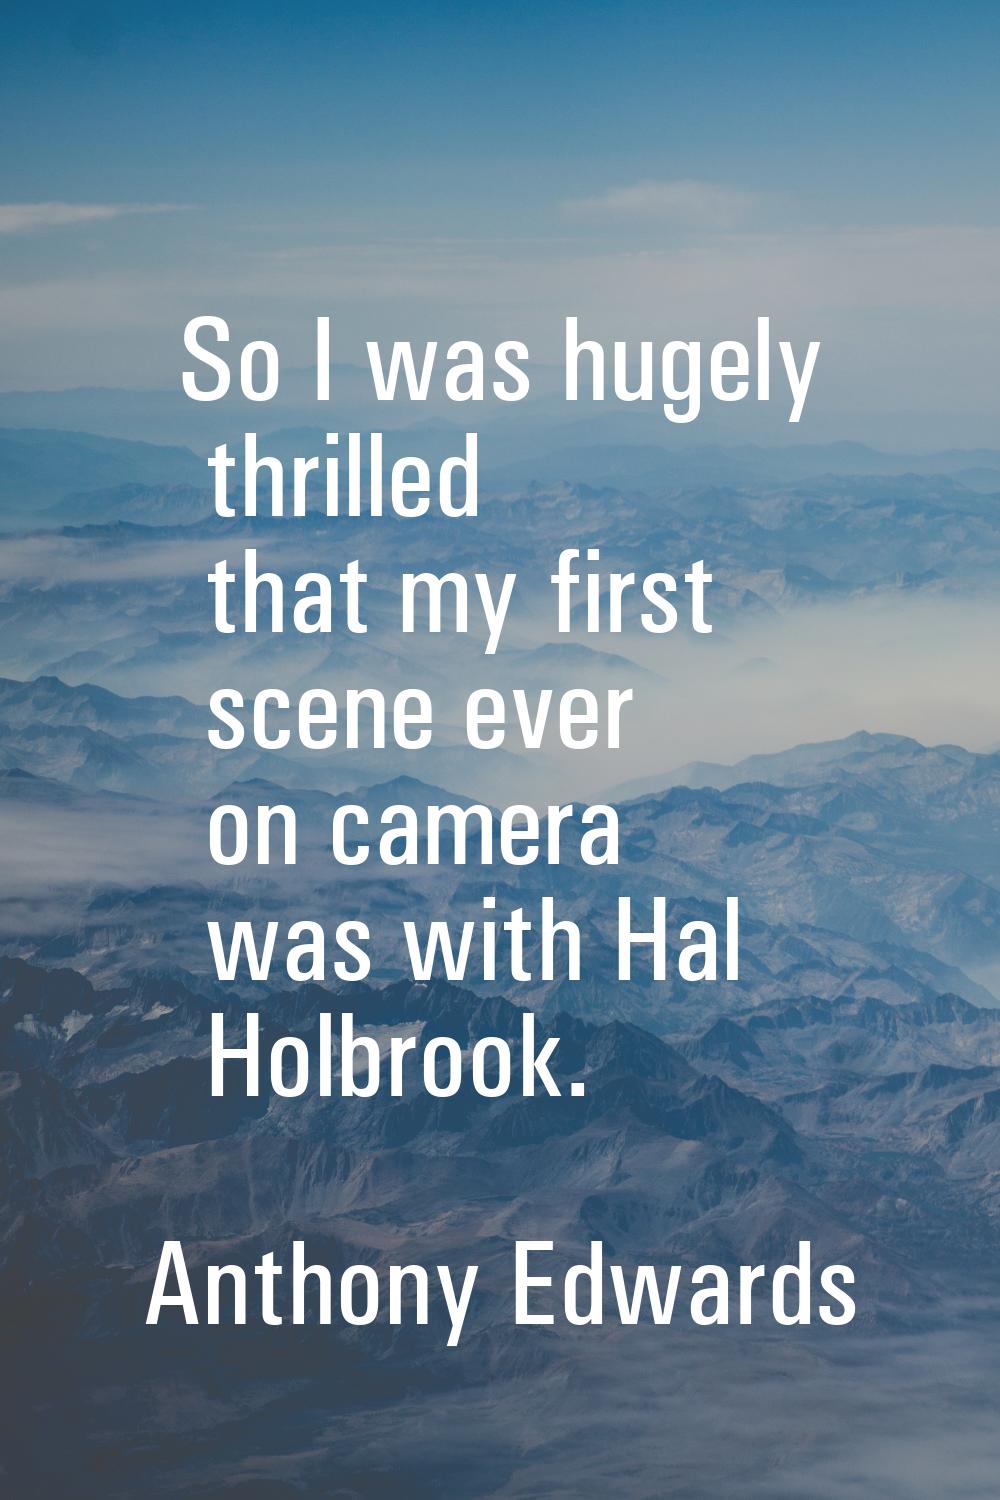 So I was hugely thrilled that my first scene ever on camera was with Hal Holbrook.